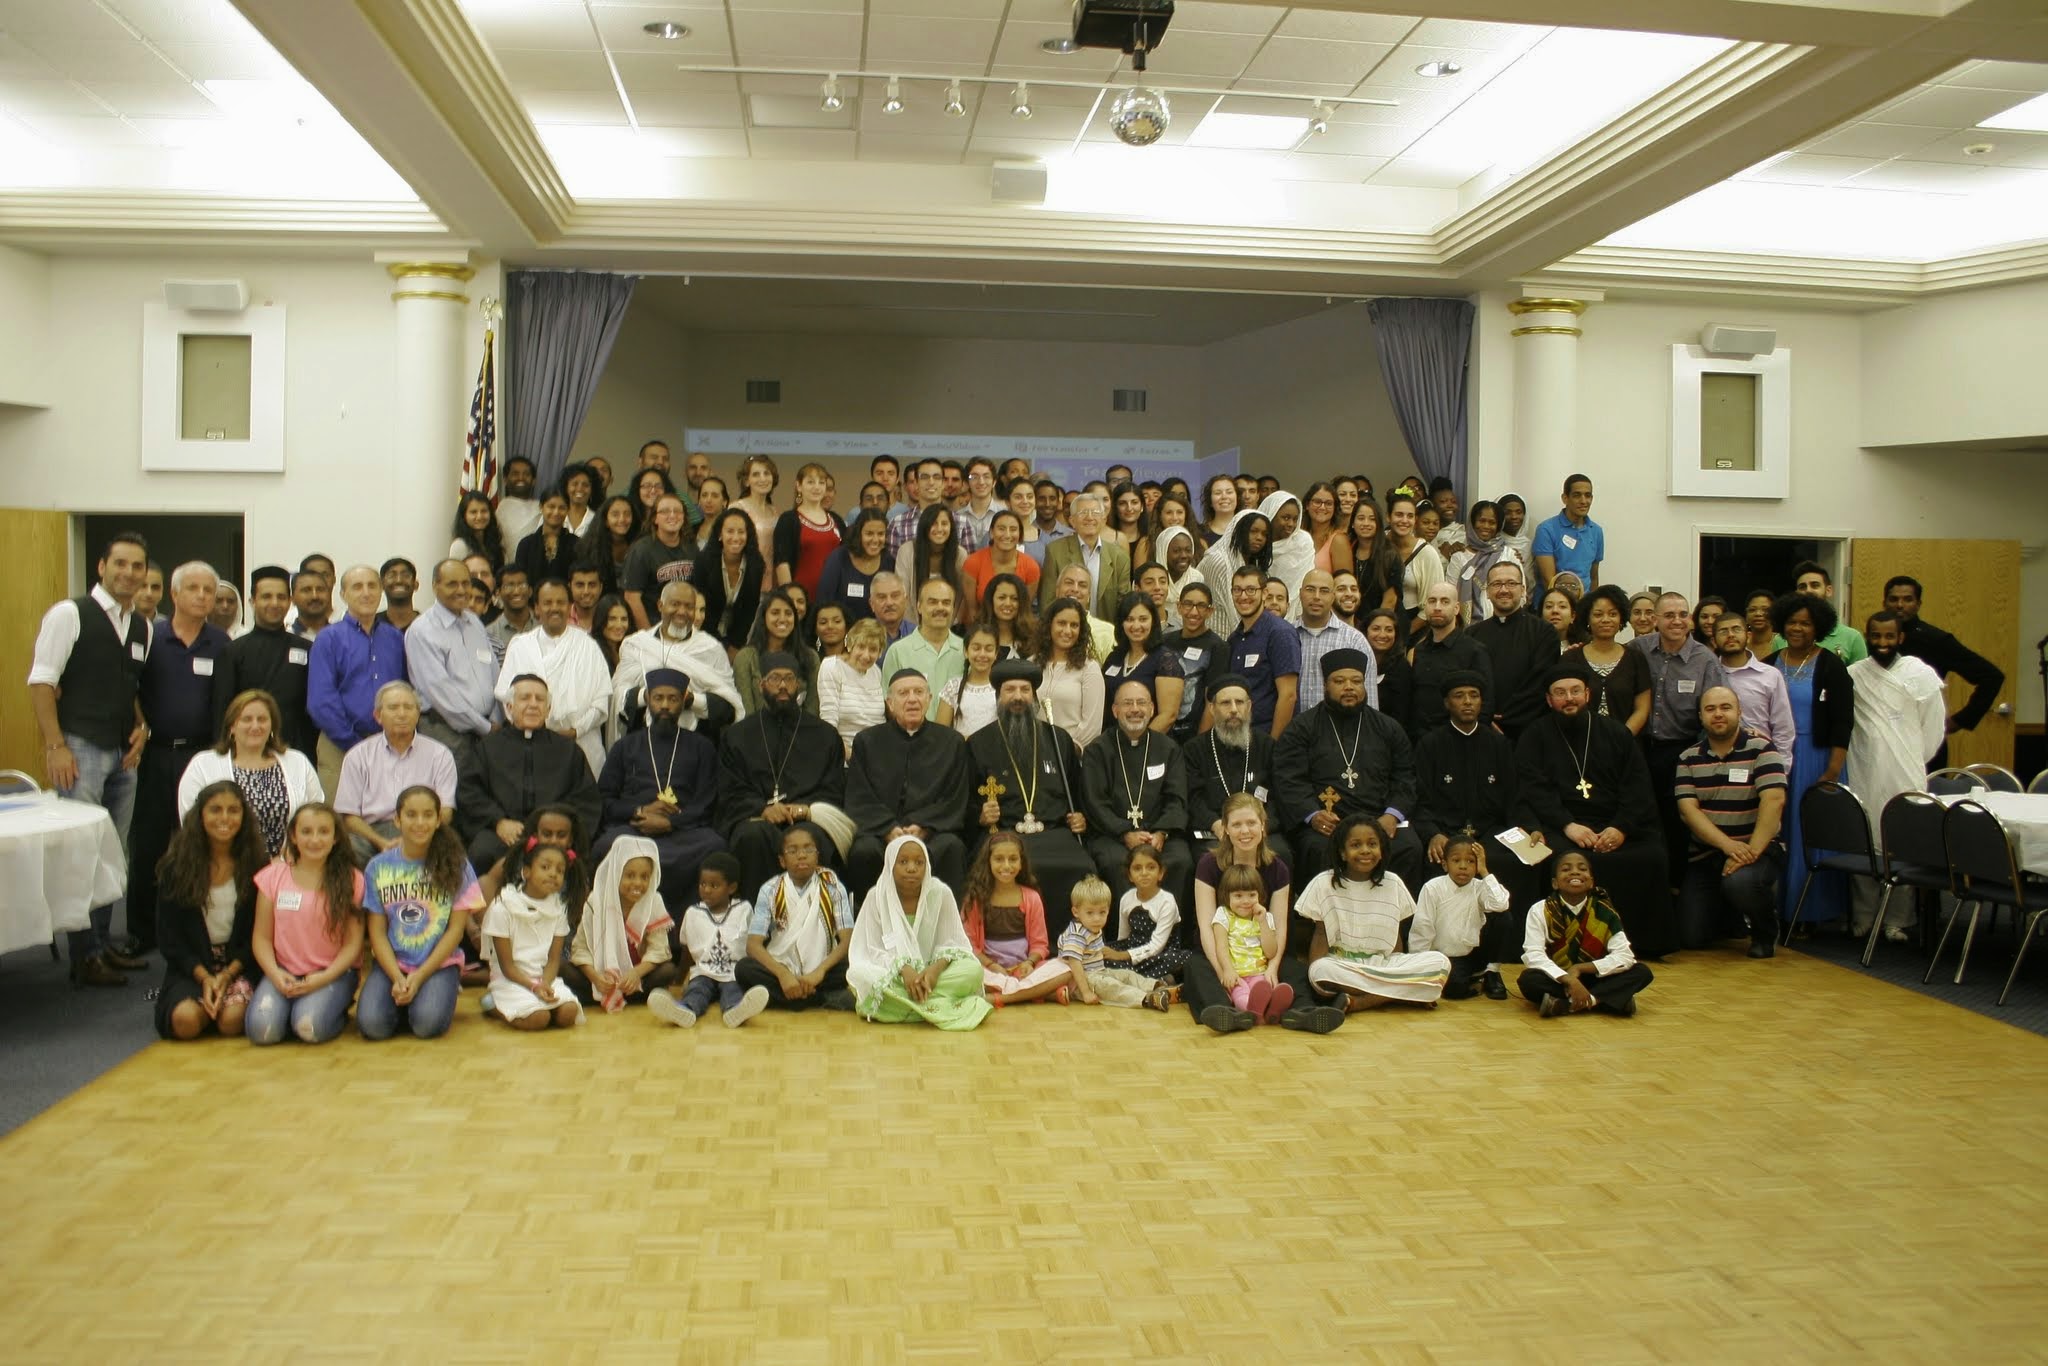 The 3rd Annual Annual Oriental Orthodox Youth Conference held in New Jersey